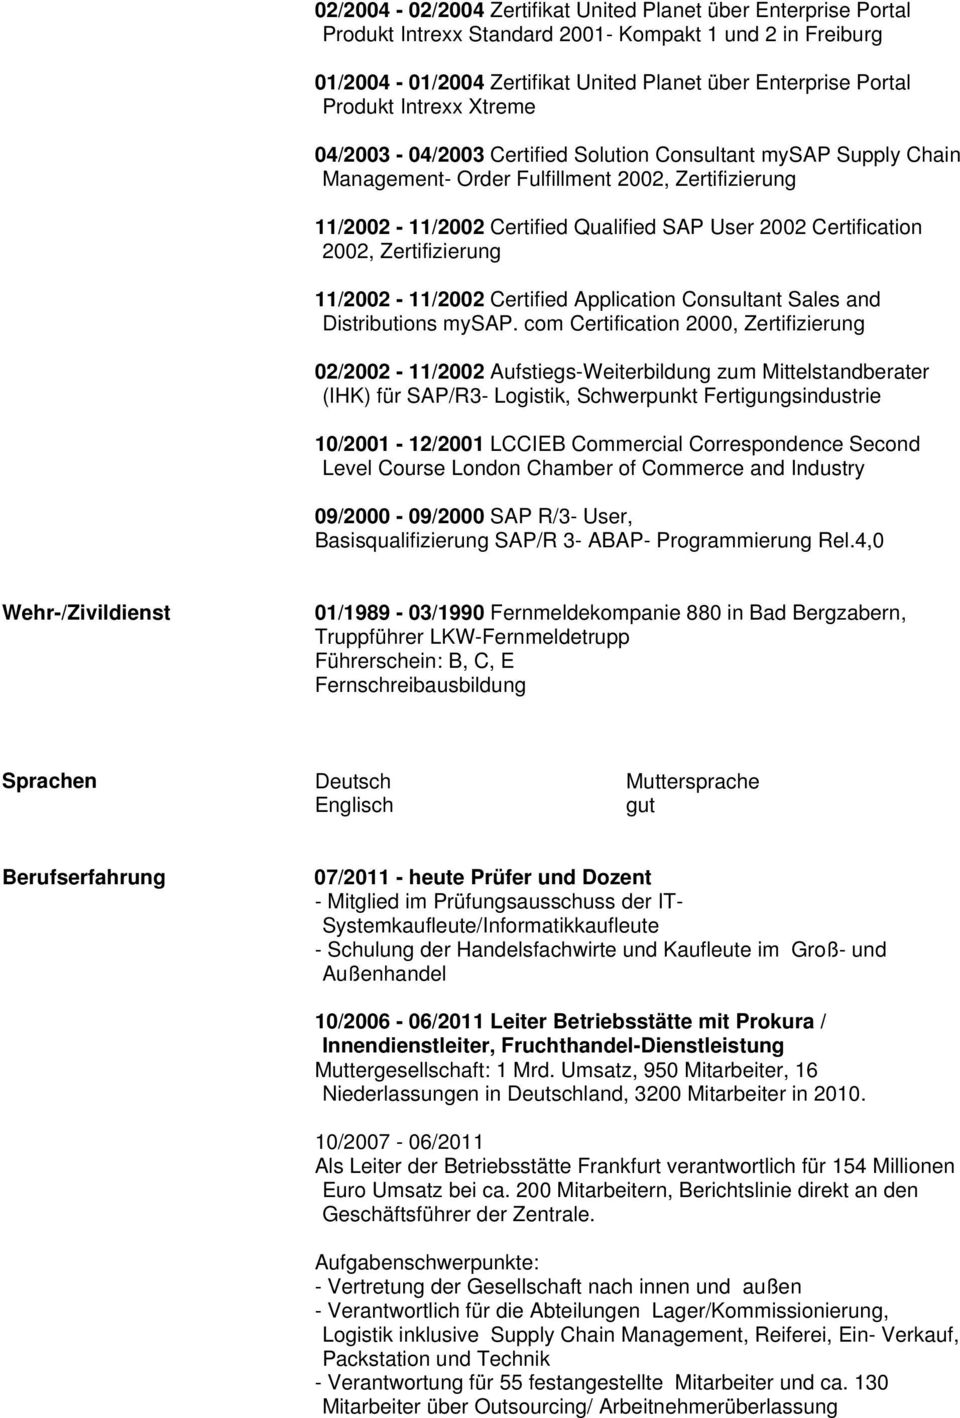 Zertifizierung 11/2002-11/2002 Certified Application Consultant Sales and Distributions mysap.